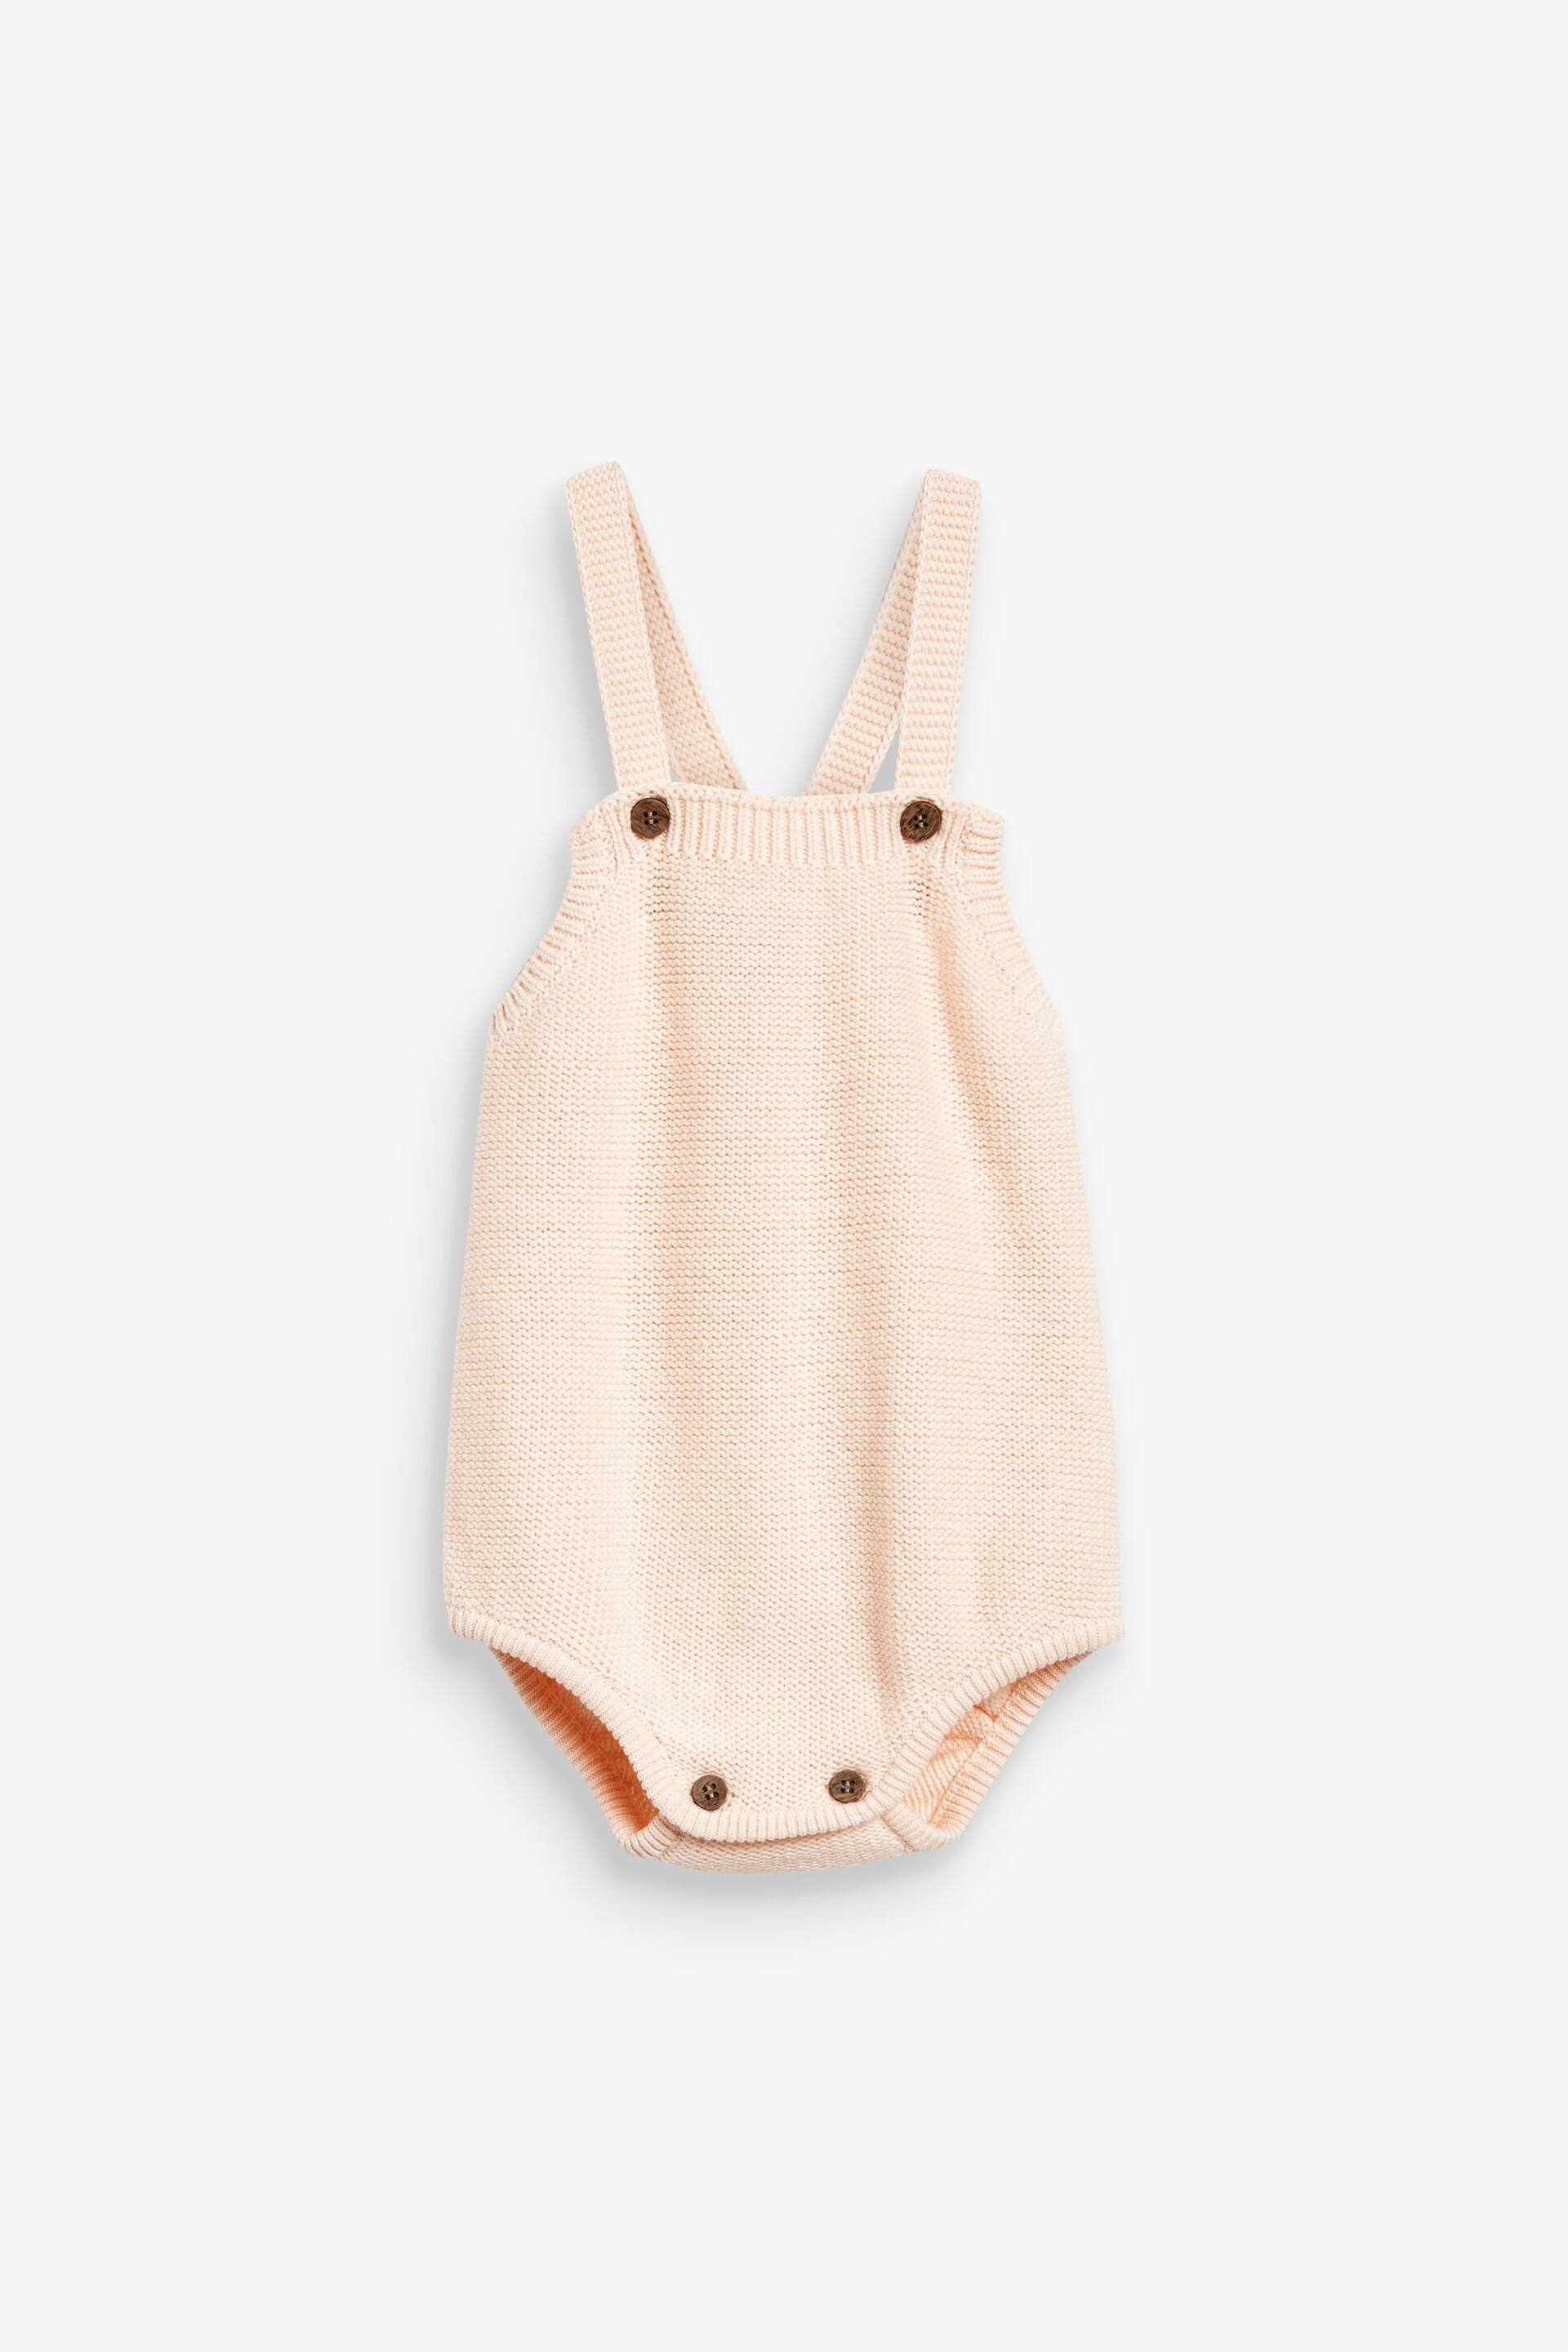 The Little Tailor Stylish Baby Knitted Romper - Image 1 of 3